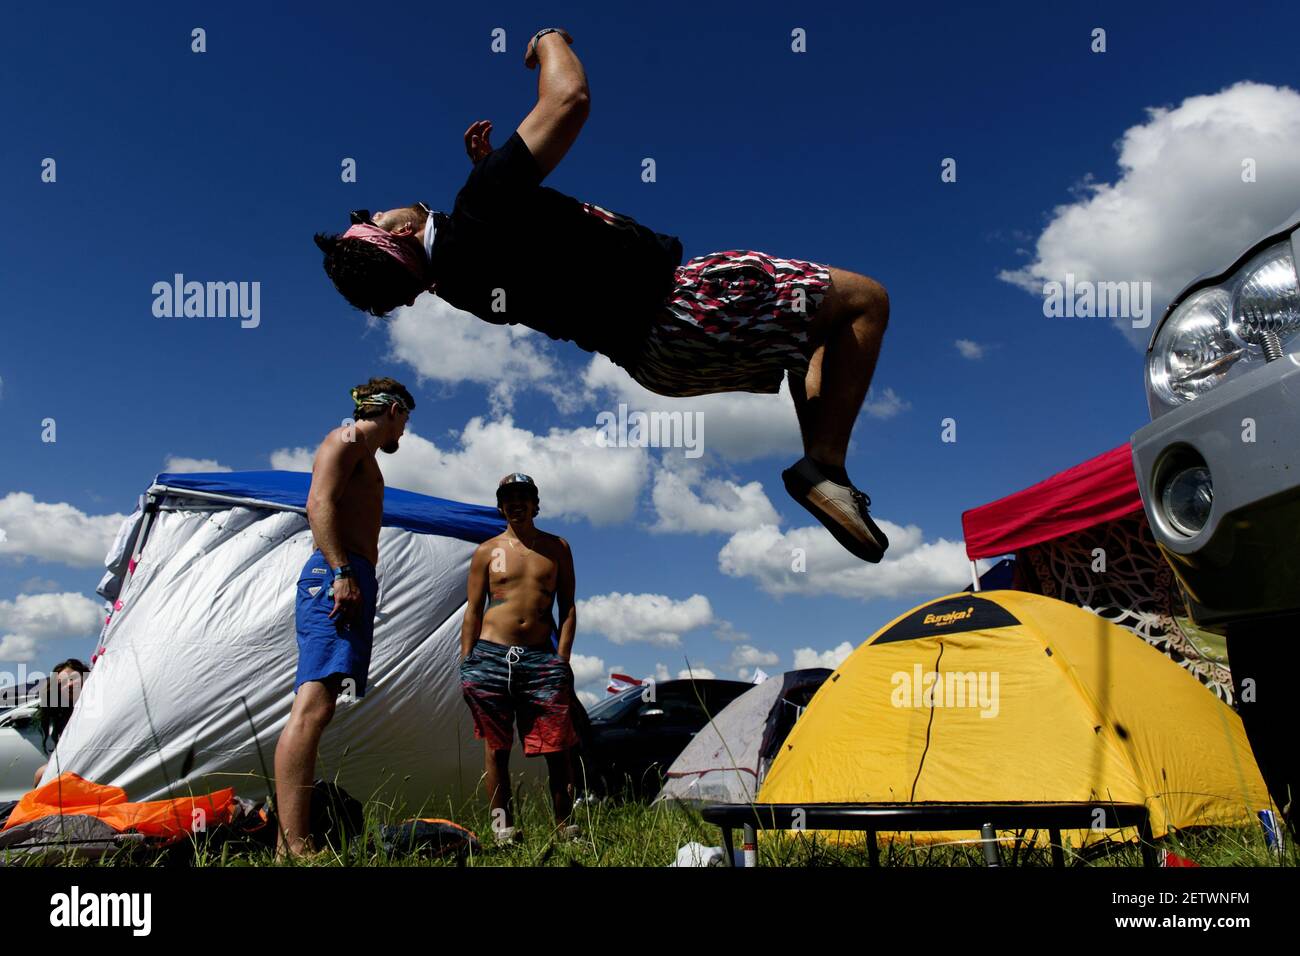 June 8 2017; Manchester, TN, USA; Bridges Tipton, of Memphis, Tennessee, does a backflip off of a small trampoline in the campgrounds at Bonnaroo Music and Arts Festival. Mandatory Credit: Calvin Mattheis/Knoxville News Sentinel via USA TODAY NETWORK *** Please Use Credit from Credit Field *** Stock Photo